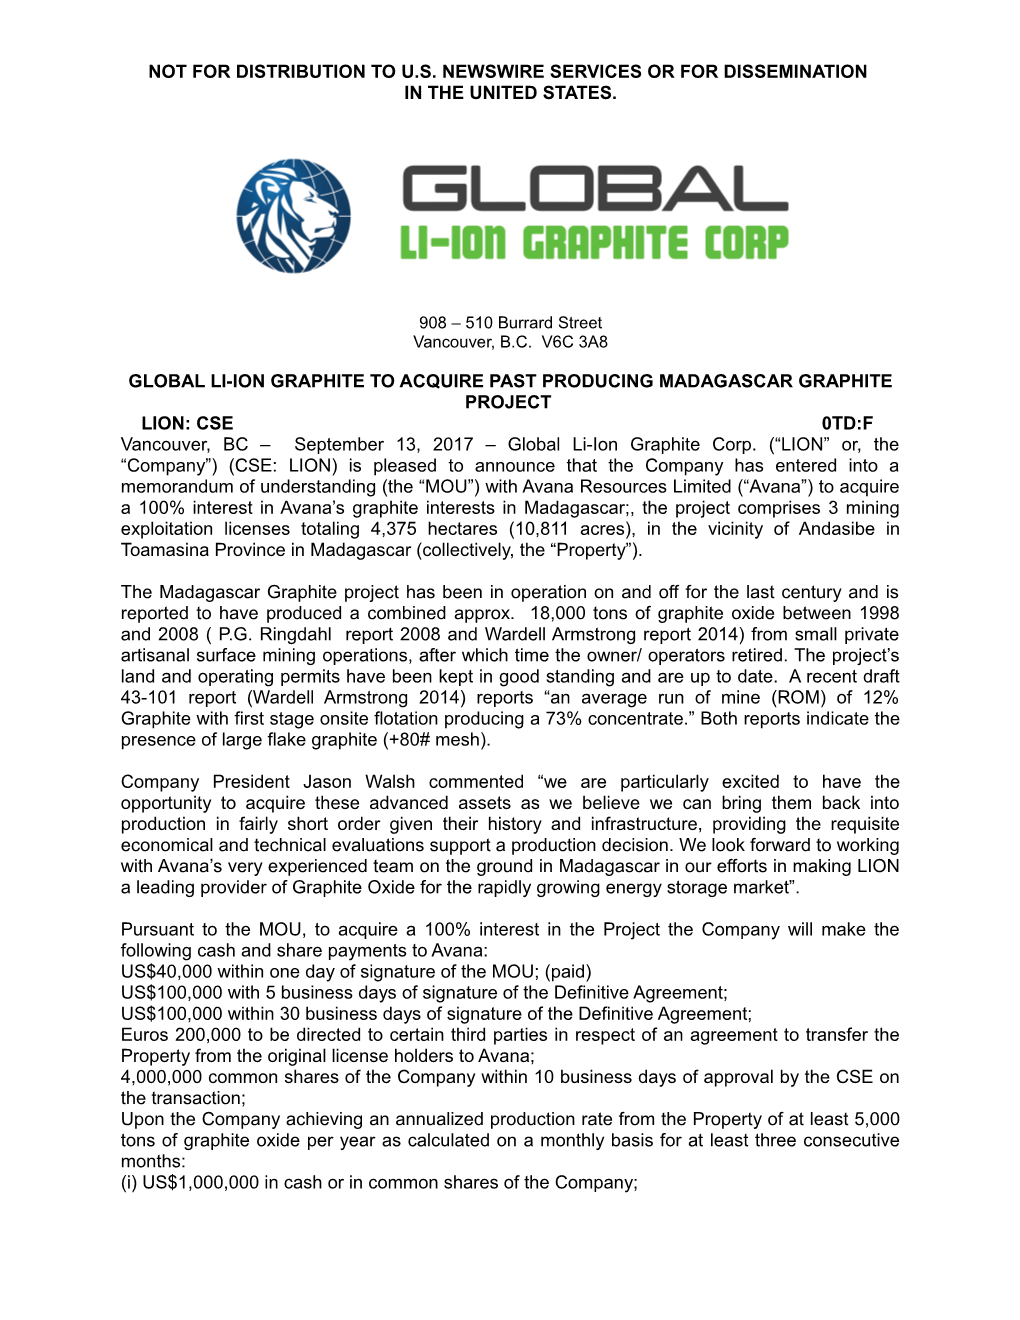 Global Li-Ion Graphite to Acquire Past Producing Madagascar Graphite Project